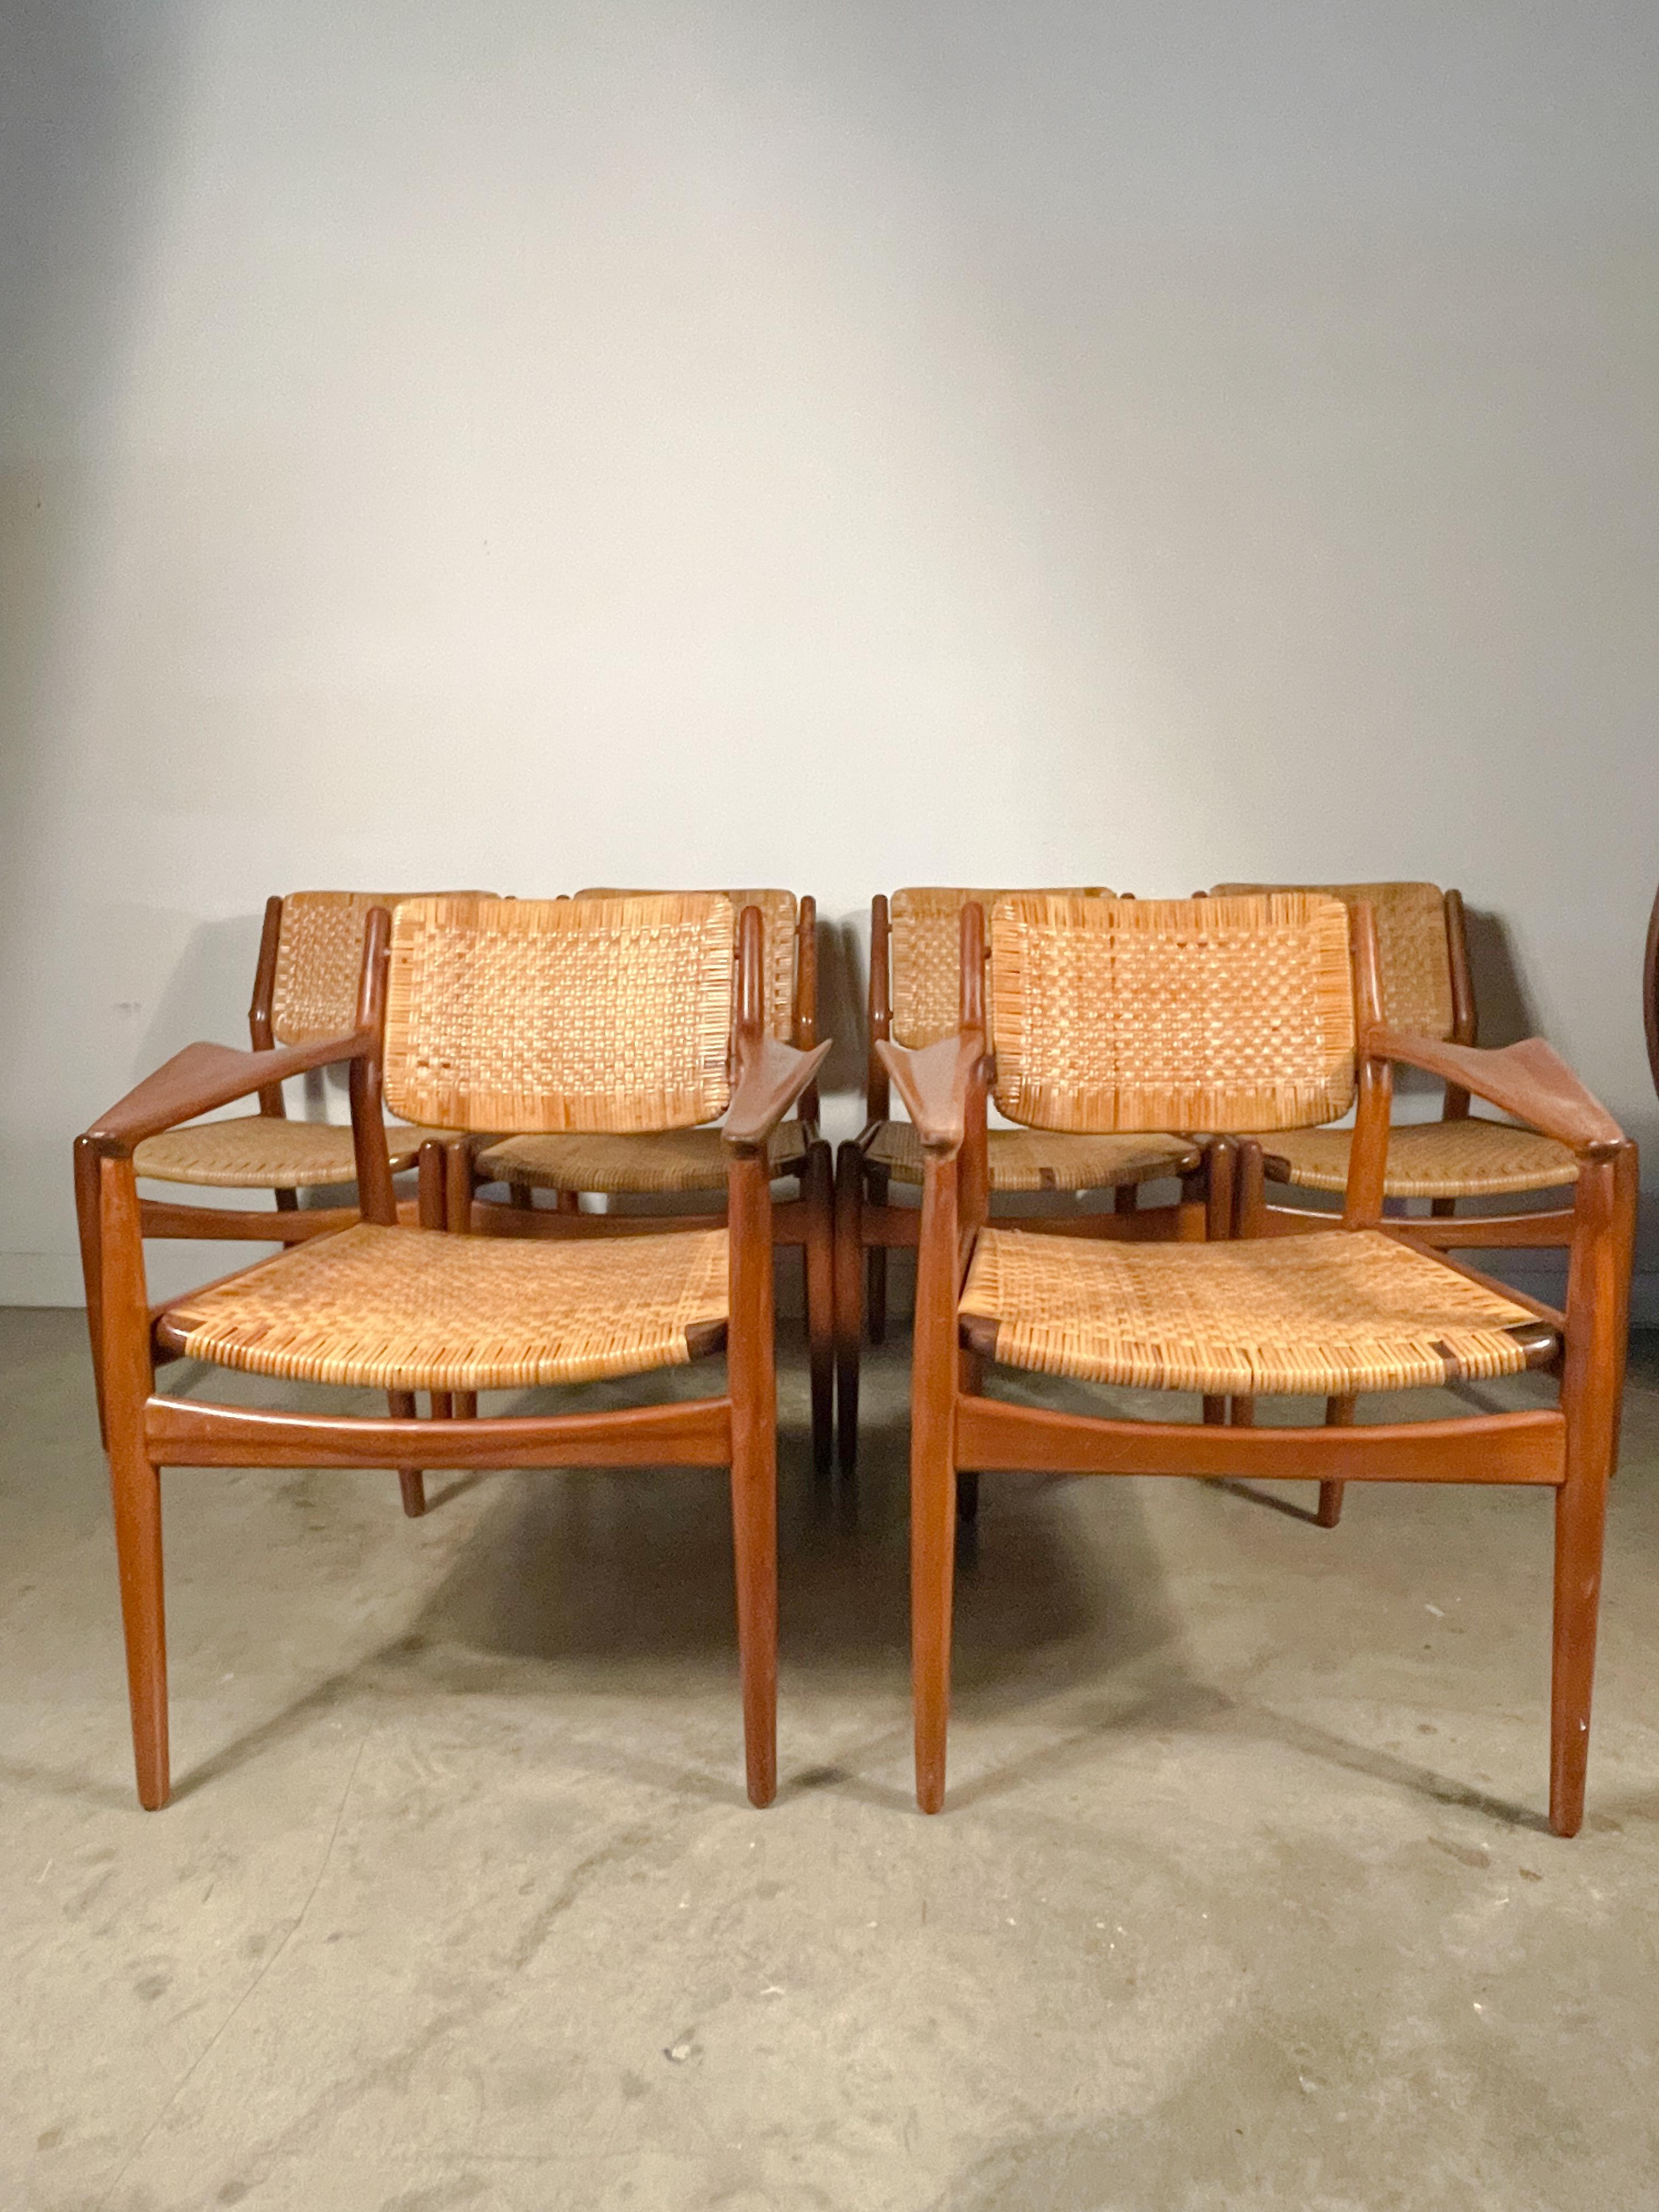 A rare set of teak framed chairs with woven cane seats and backs designed by Arne Vodder and made by Sibast of Denmark in the 1950s.
 
This set includes four side chairs and two model 51a arm chairs, the latter of which are particularly sought